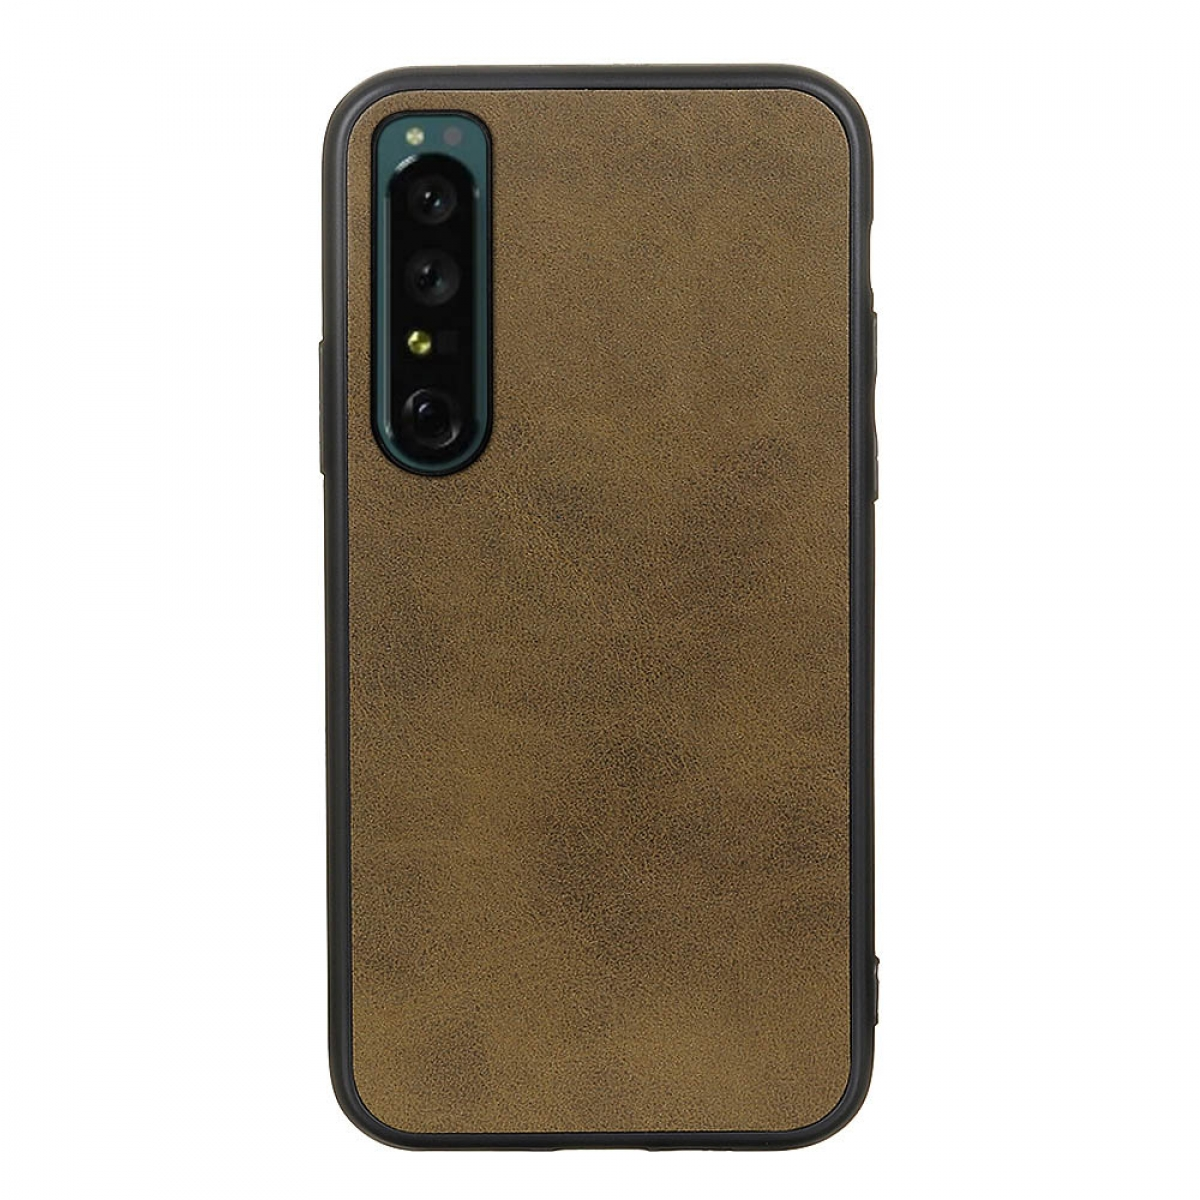 Backcover, Olive Xperia CA-SE22, IV, CASEONLINE 1 Sony,